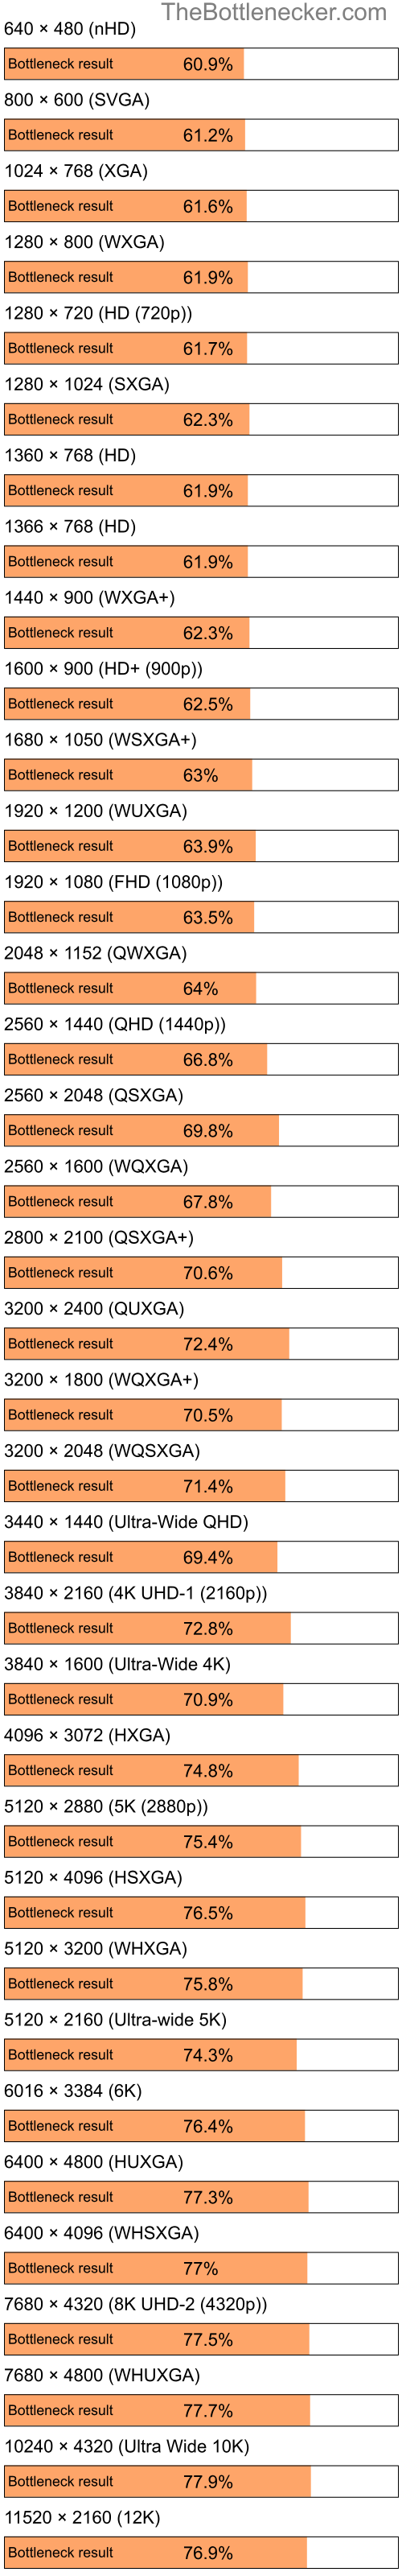 Bottleneck results by resolution for Intel Pentium 4 and NVIDIA GeForce 7300 LE in General Tasks